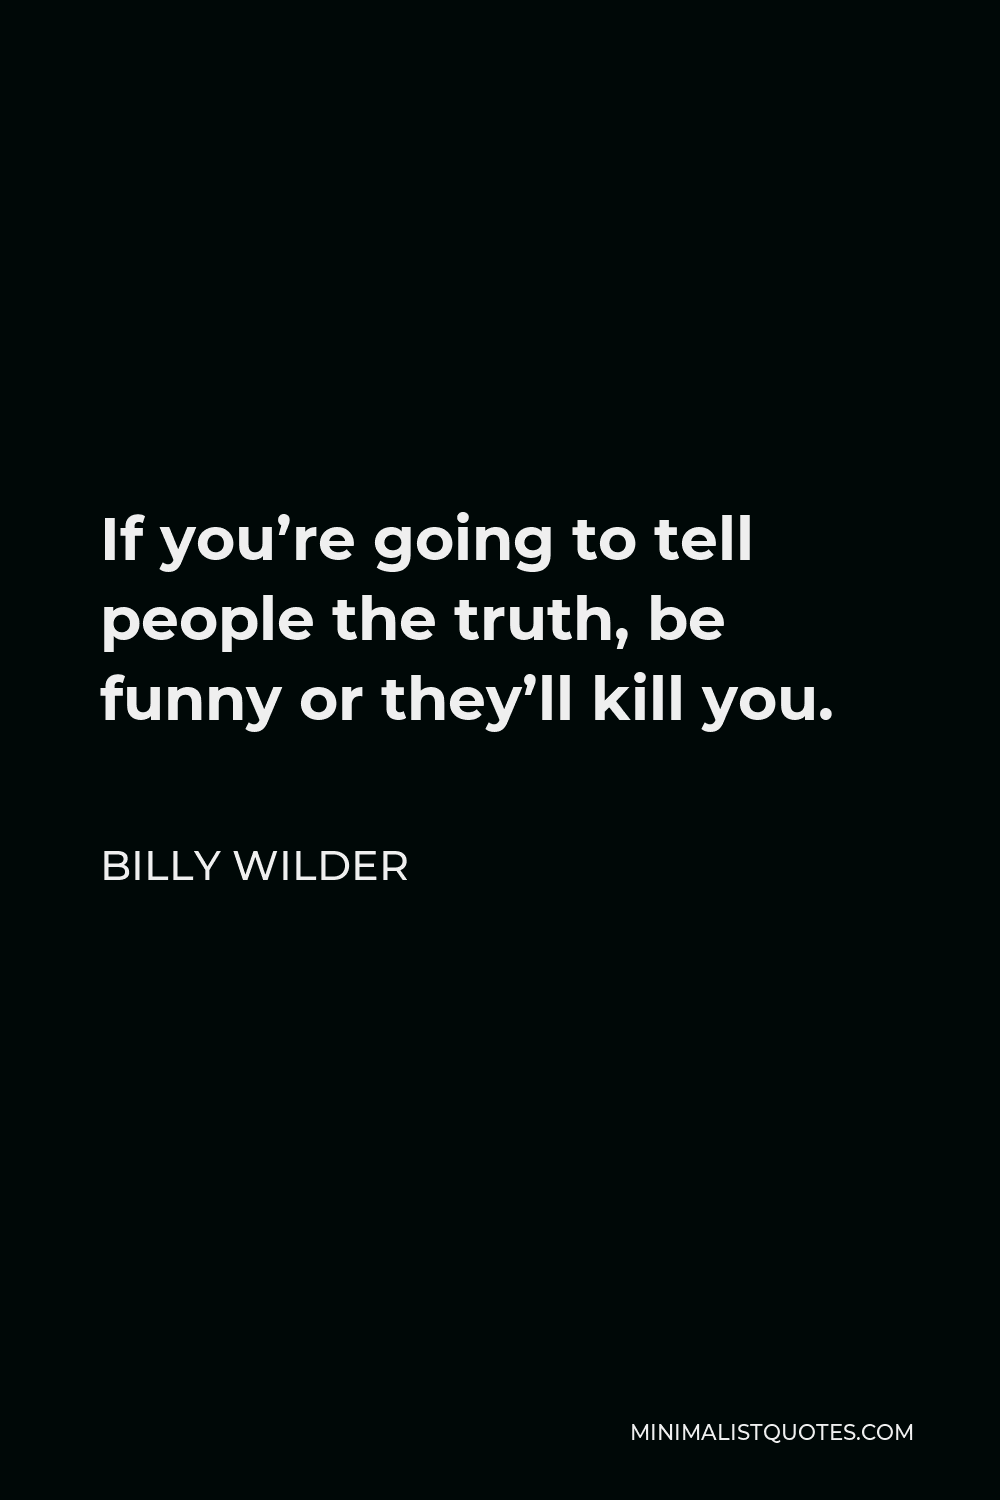 Billy Wilder Quote - If you’re going to tell people the truth, be funny or they’ll kill you.